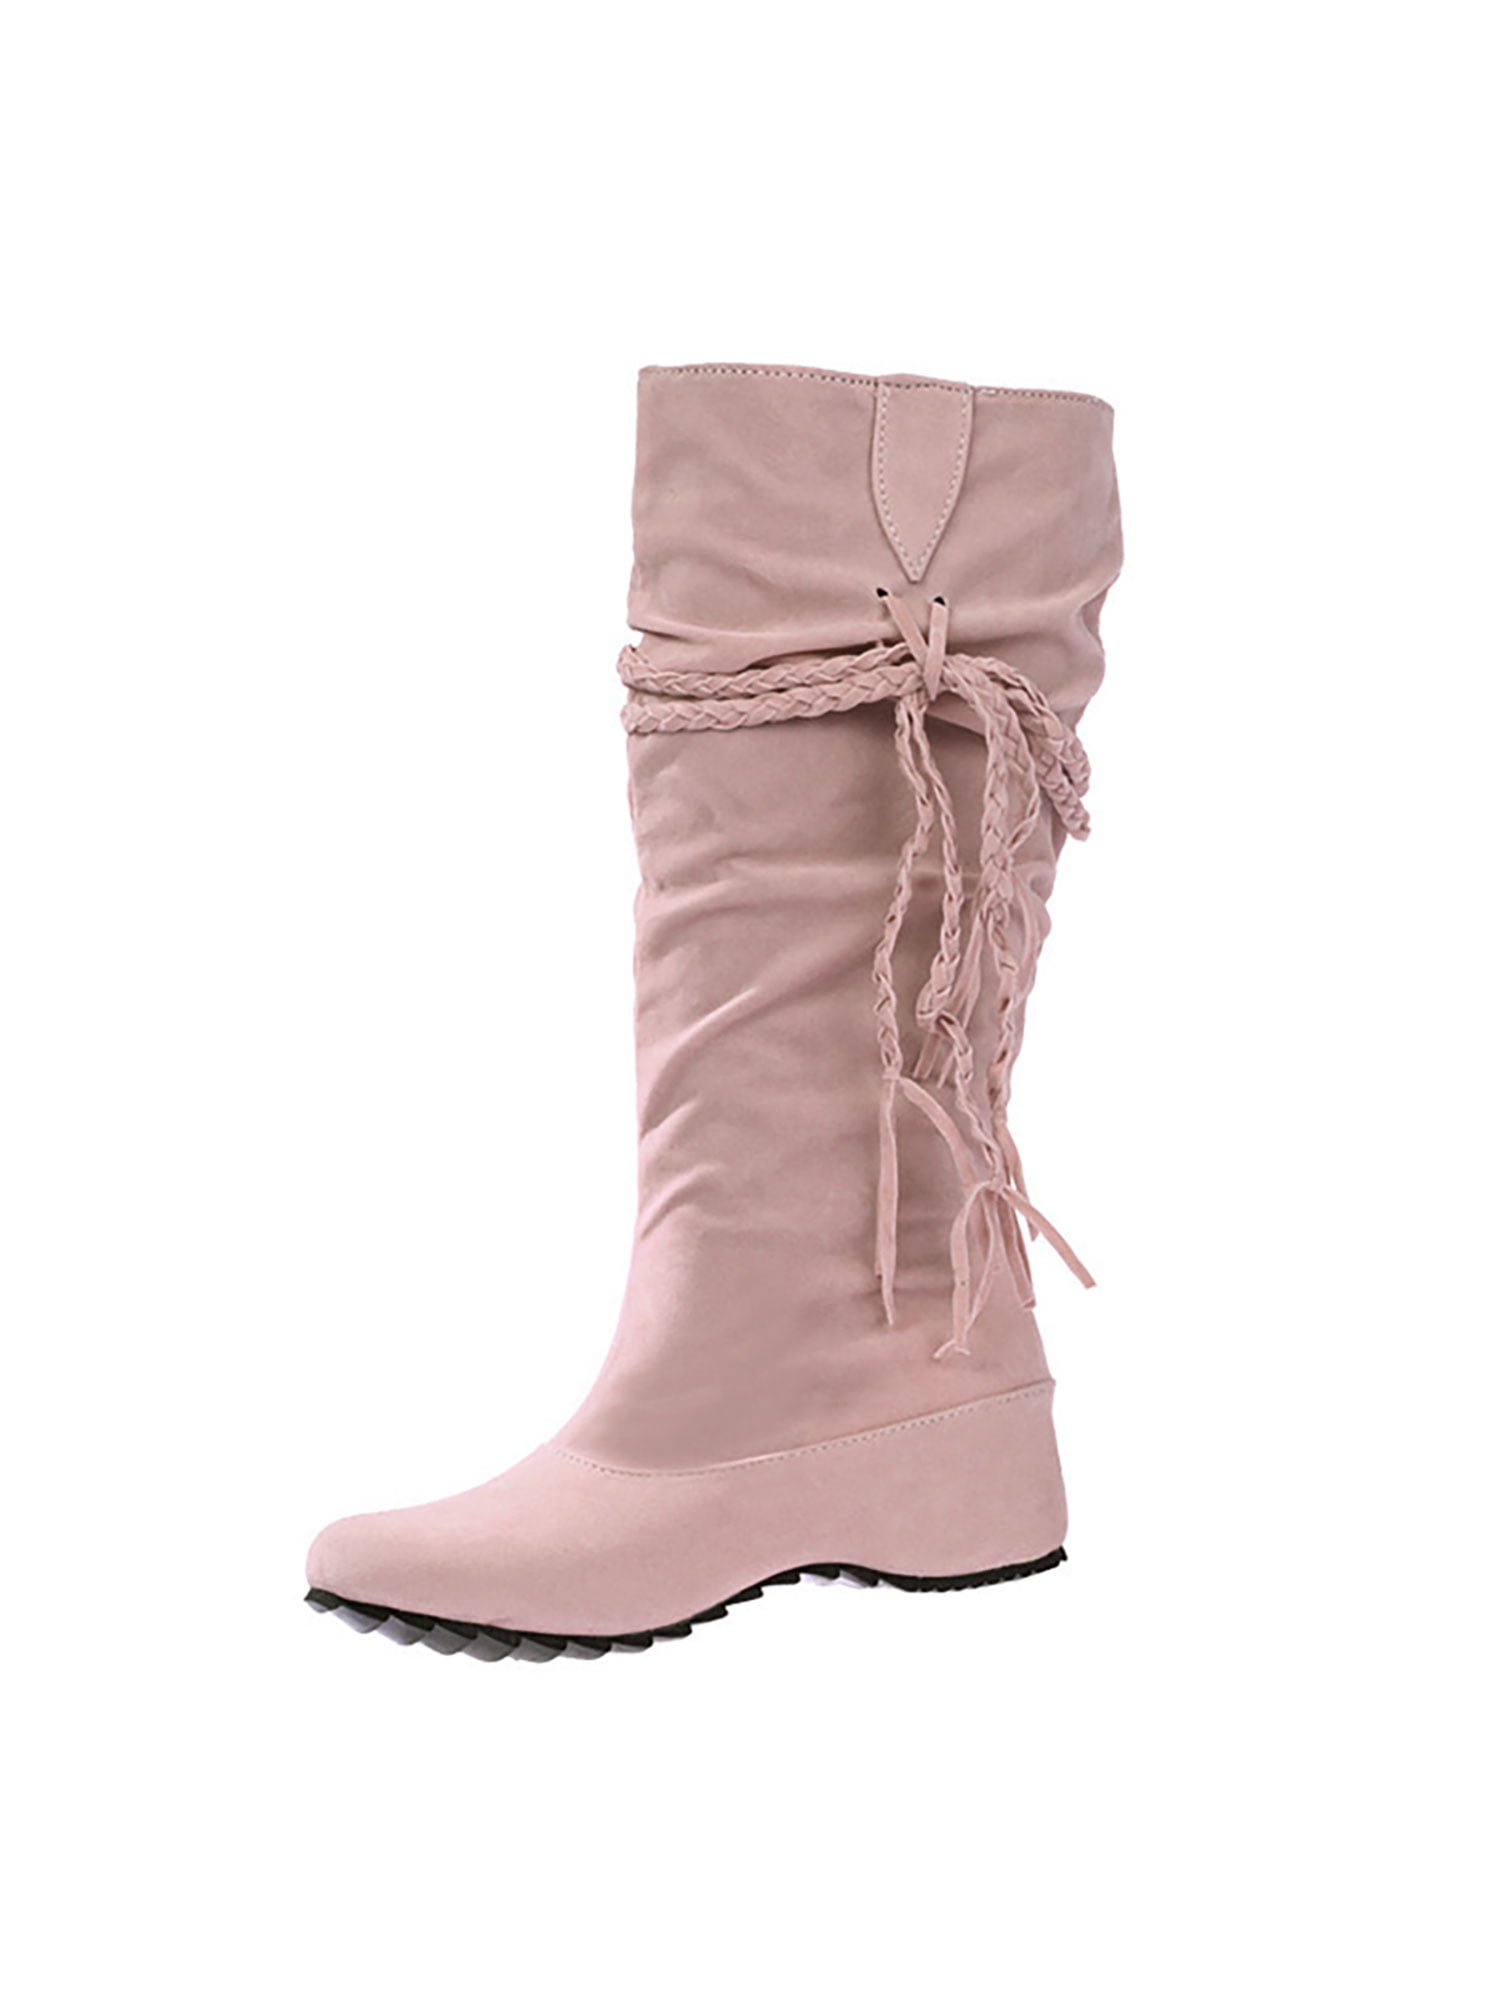 Ymiytan Women's Slouchy Pull On Knee High Boots Winter Flat Fashion Boot  Pink 6.5